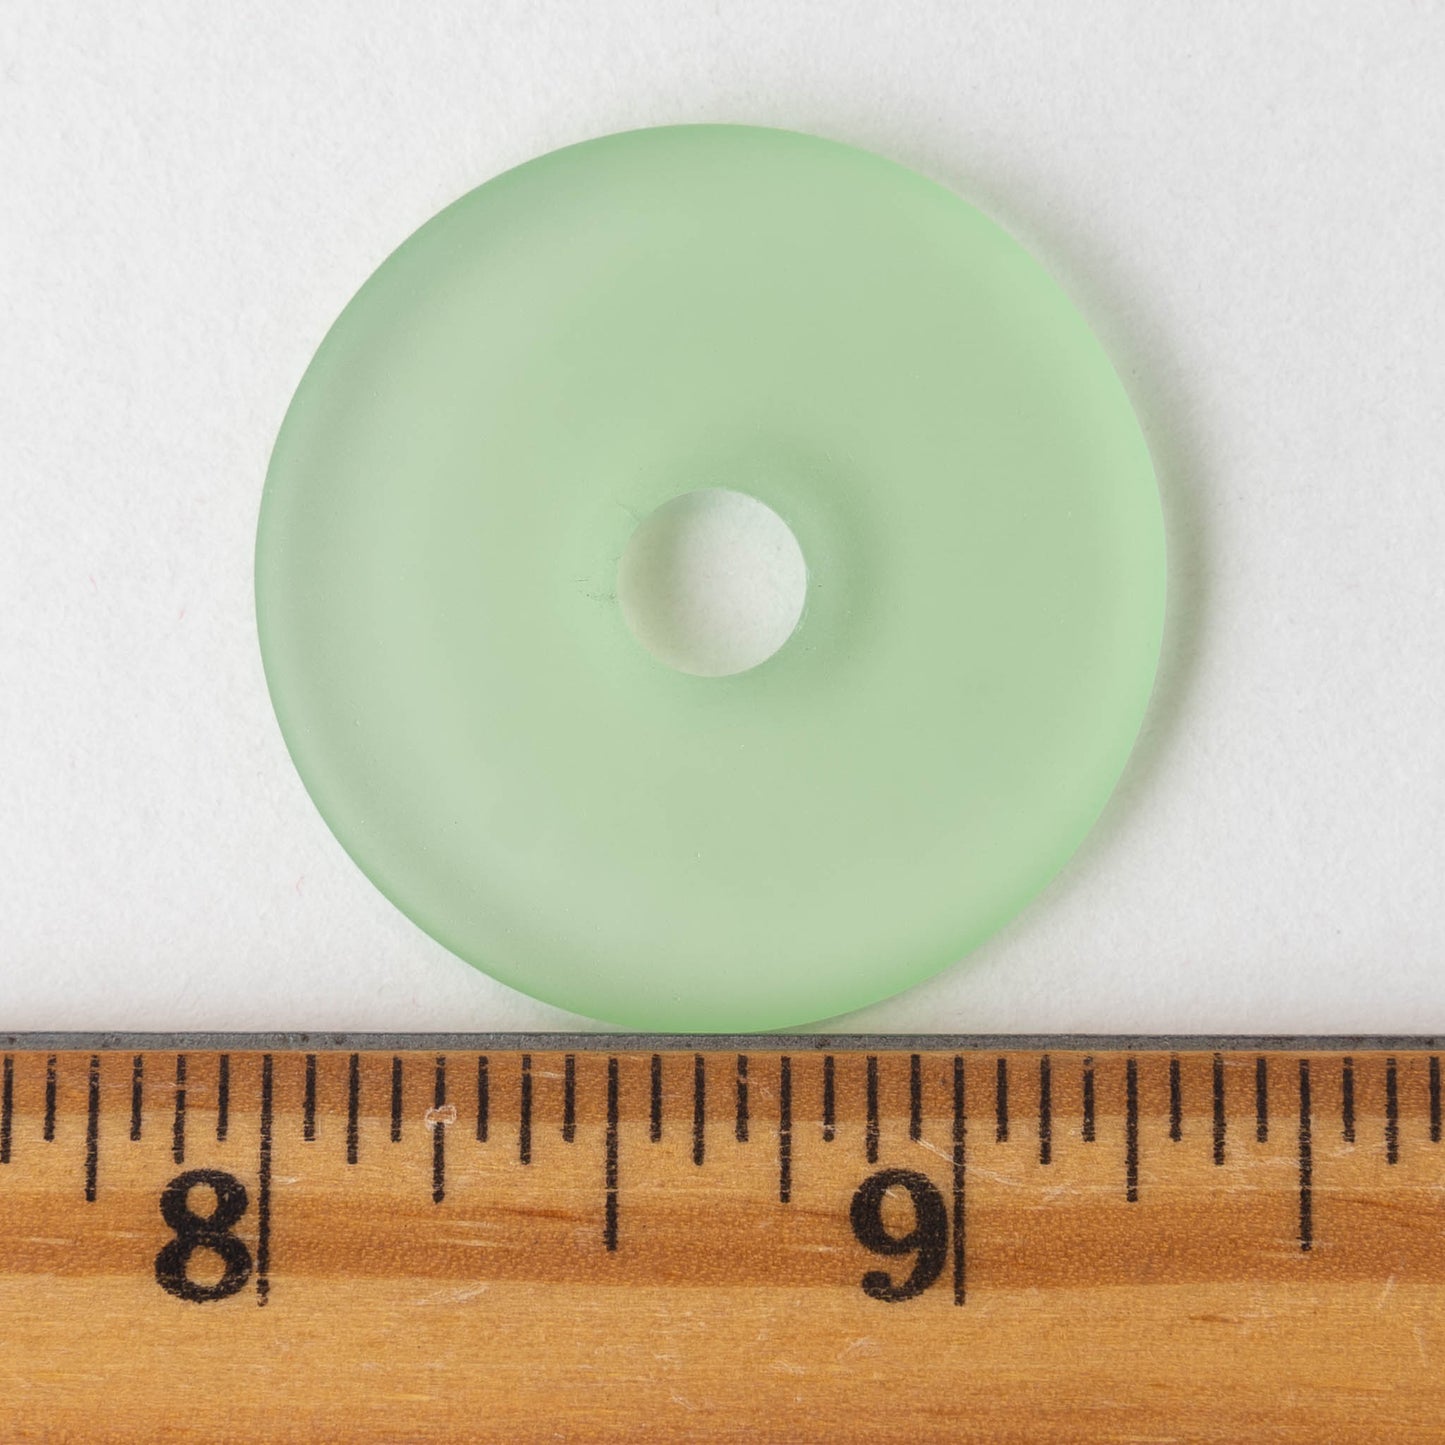 34mm Frosted Glass Donut - Peridot Green - 1 Donut